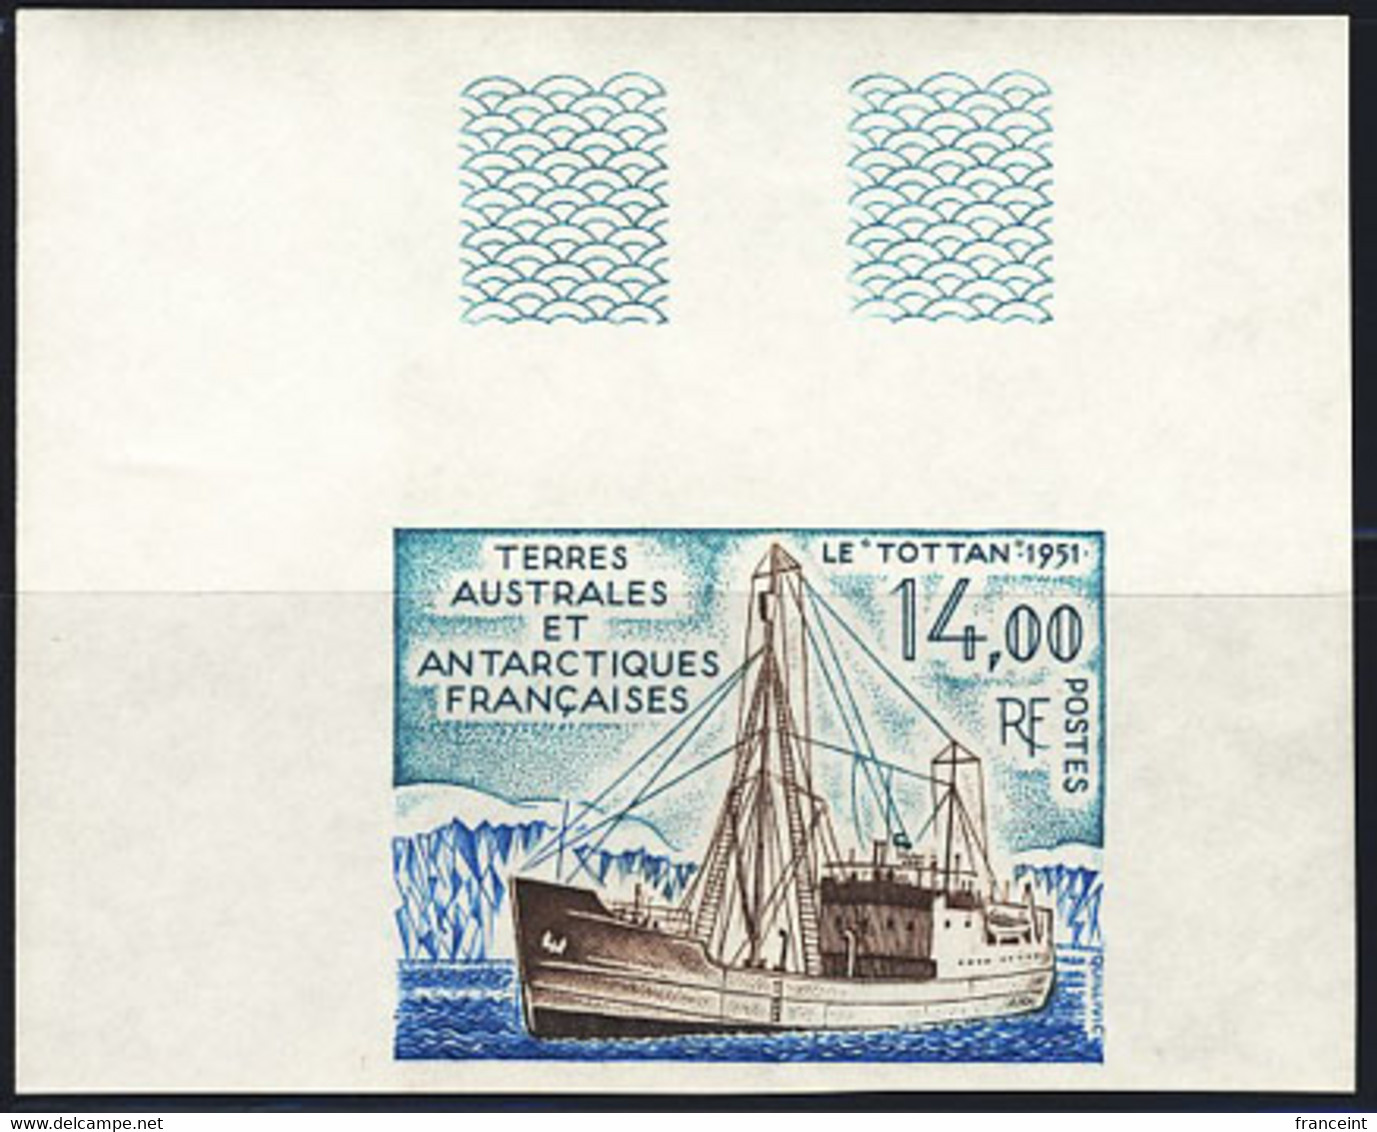 F.S.A.T. (1992) Supply Ship "le Tottan". Corner Imperforate. Scott No 171, Yvert No 169. - Imperforates, Proofs & Errors